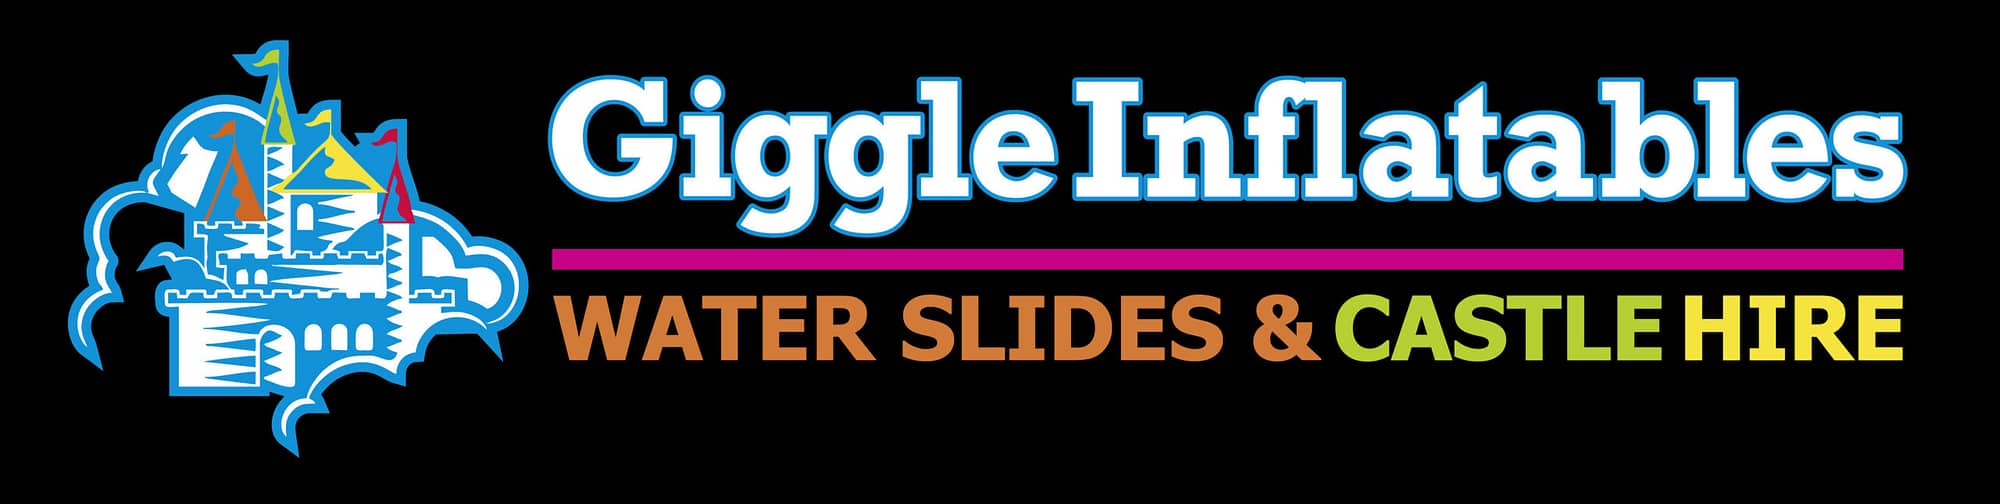 Giggle Inflatables